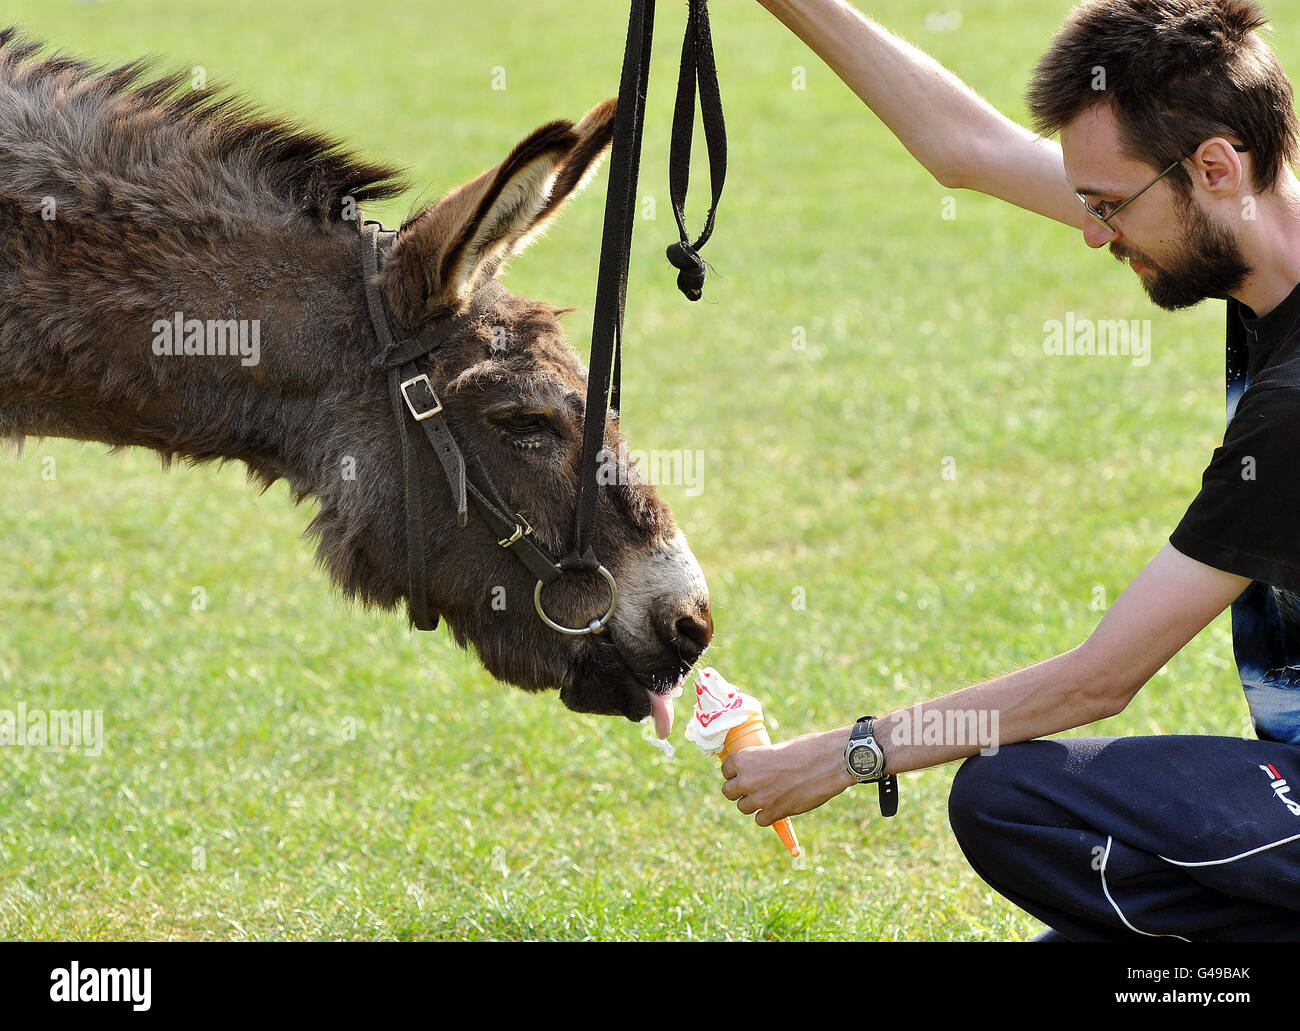 Toby the Donkey enjoys a refreshing vanilla ice cream cone held by his handler Gary Westphel, after spending the day giving rides to young children, on Blackheath in south East London. Stock Photo